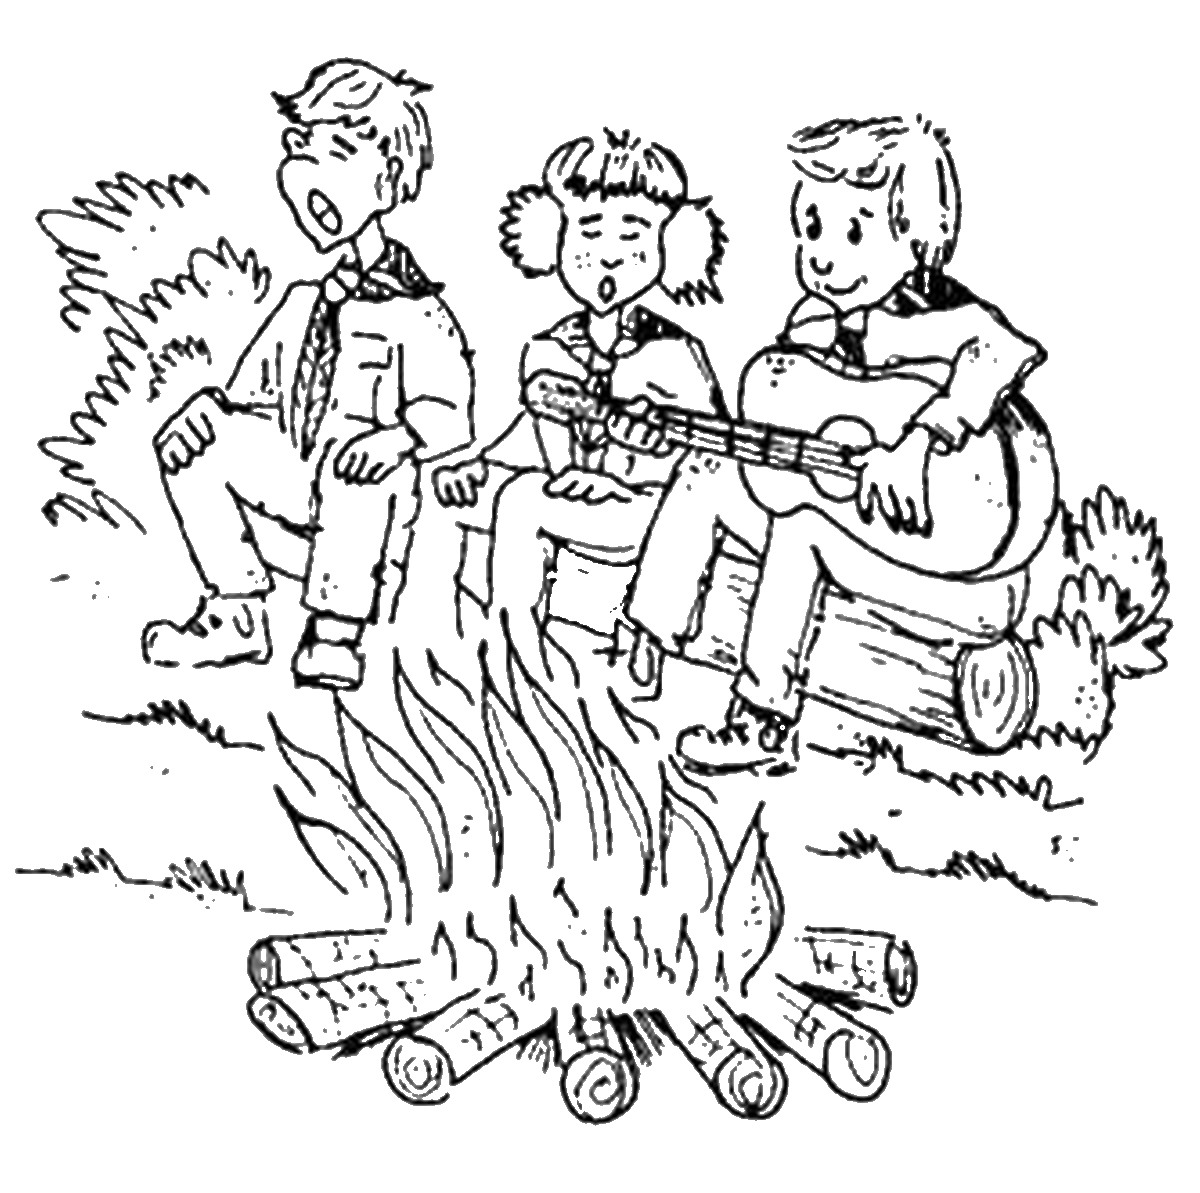 que es lag ba omer coloring pages - photo #2